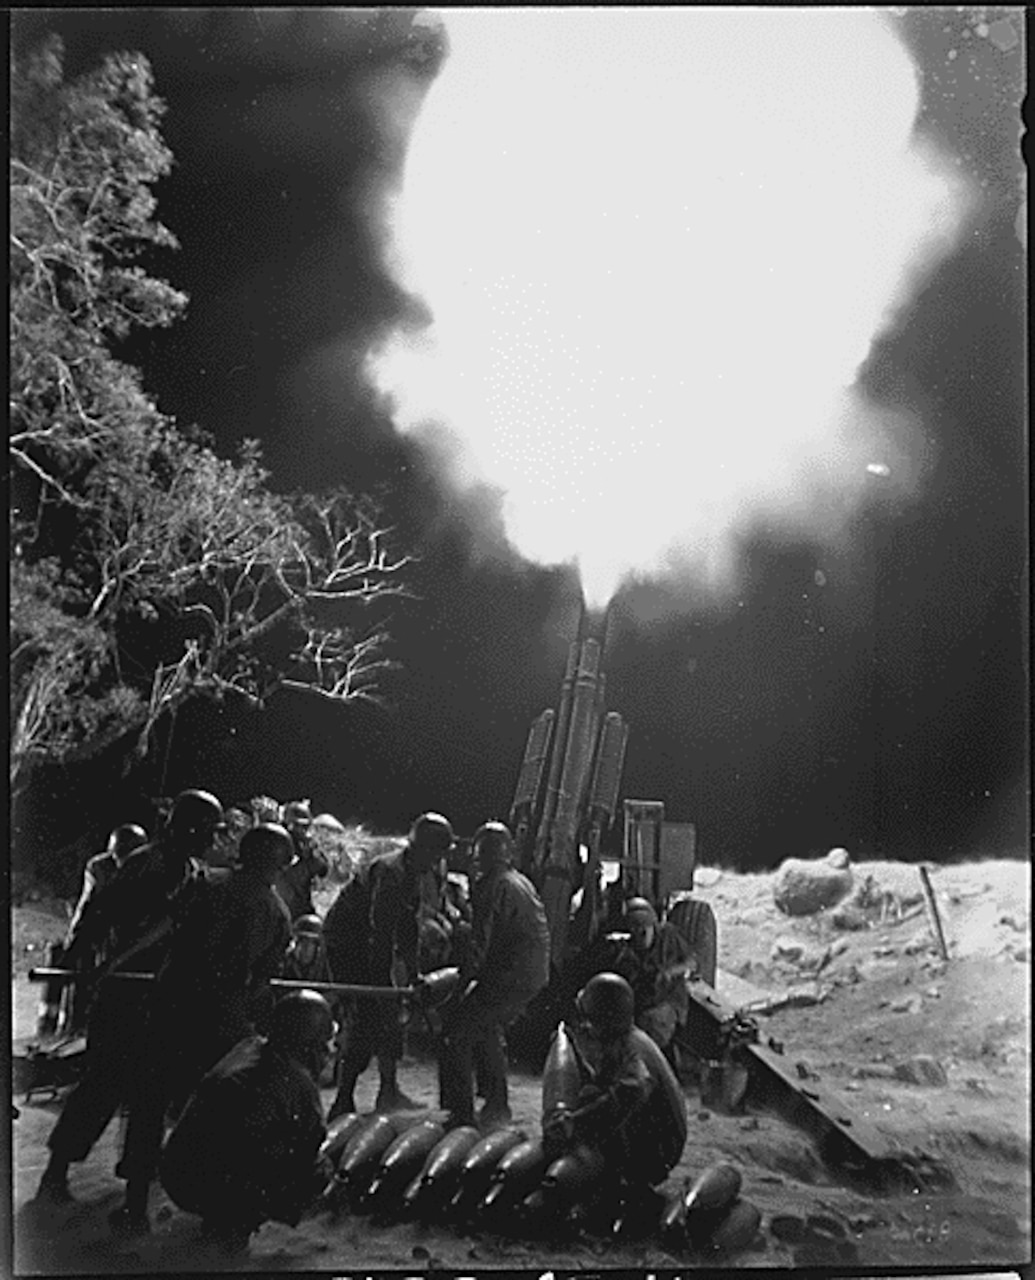 Soldiers fire heavy artillery at night.